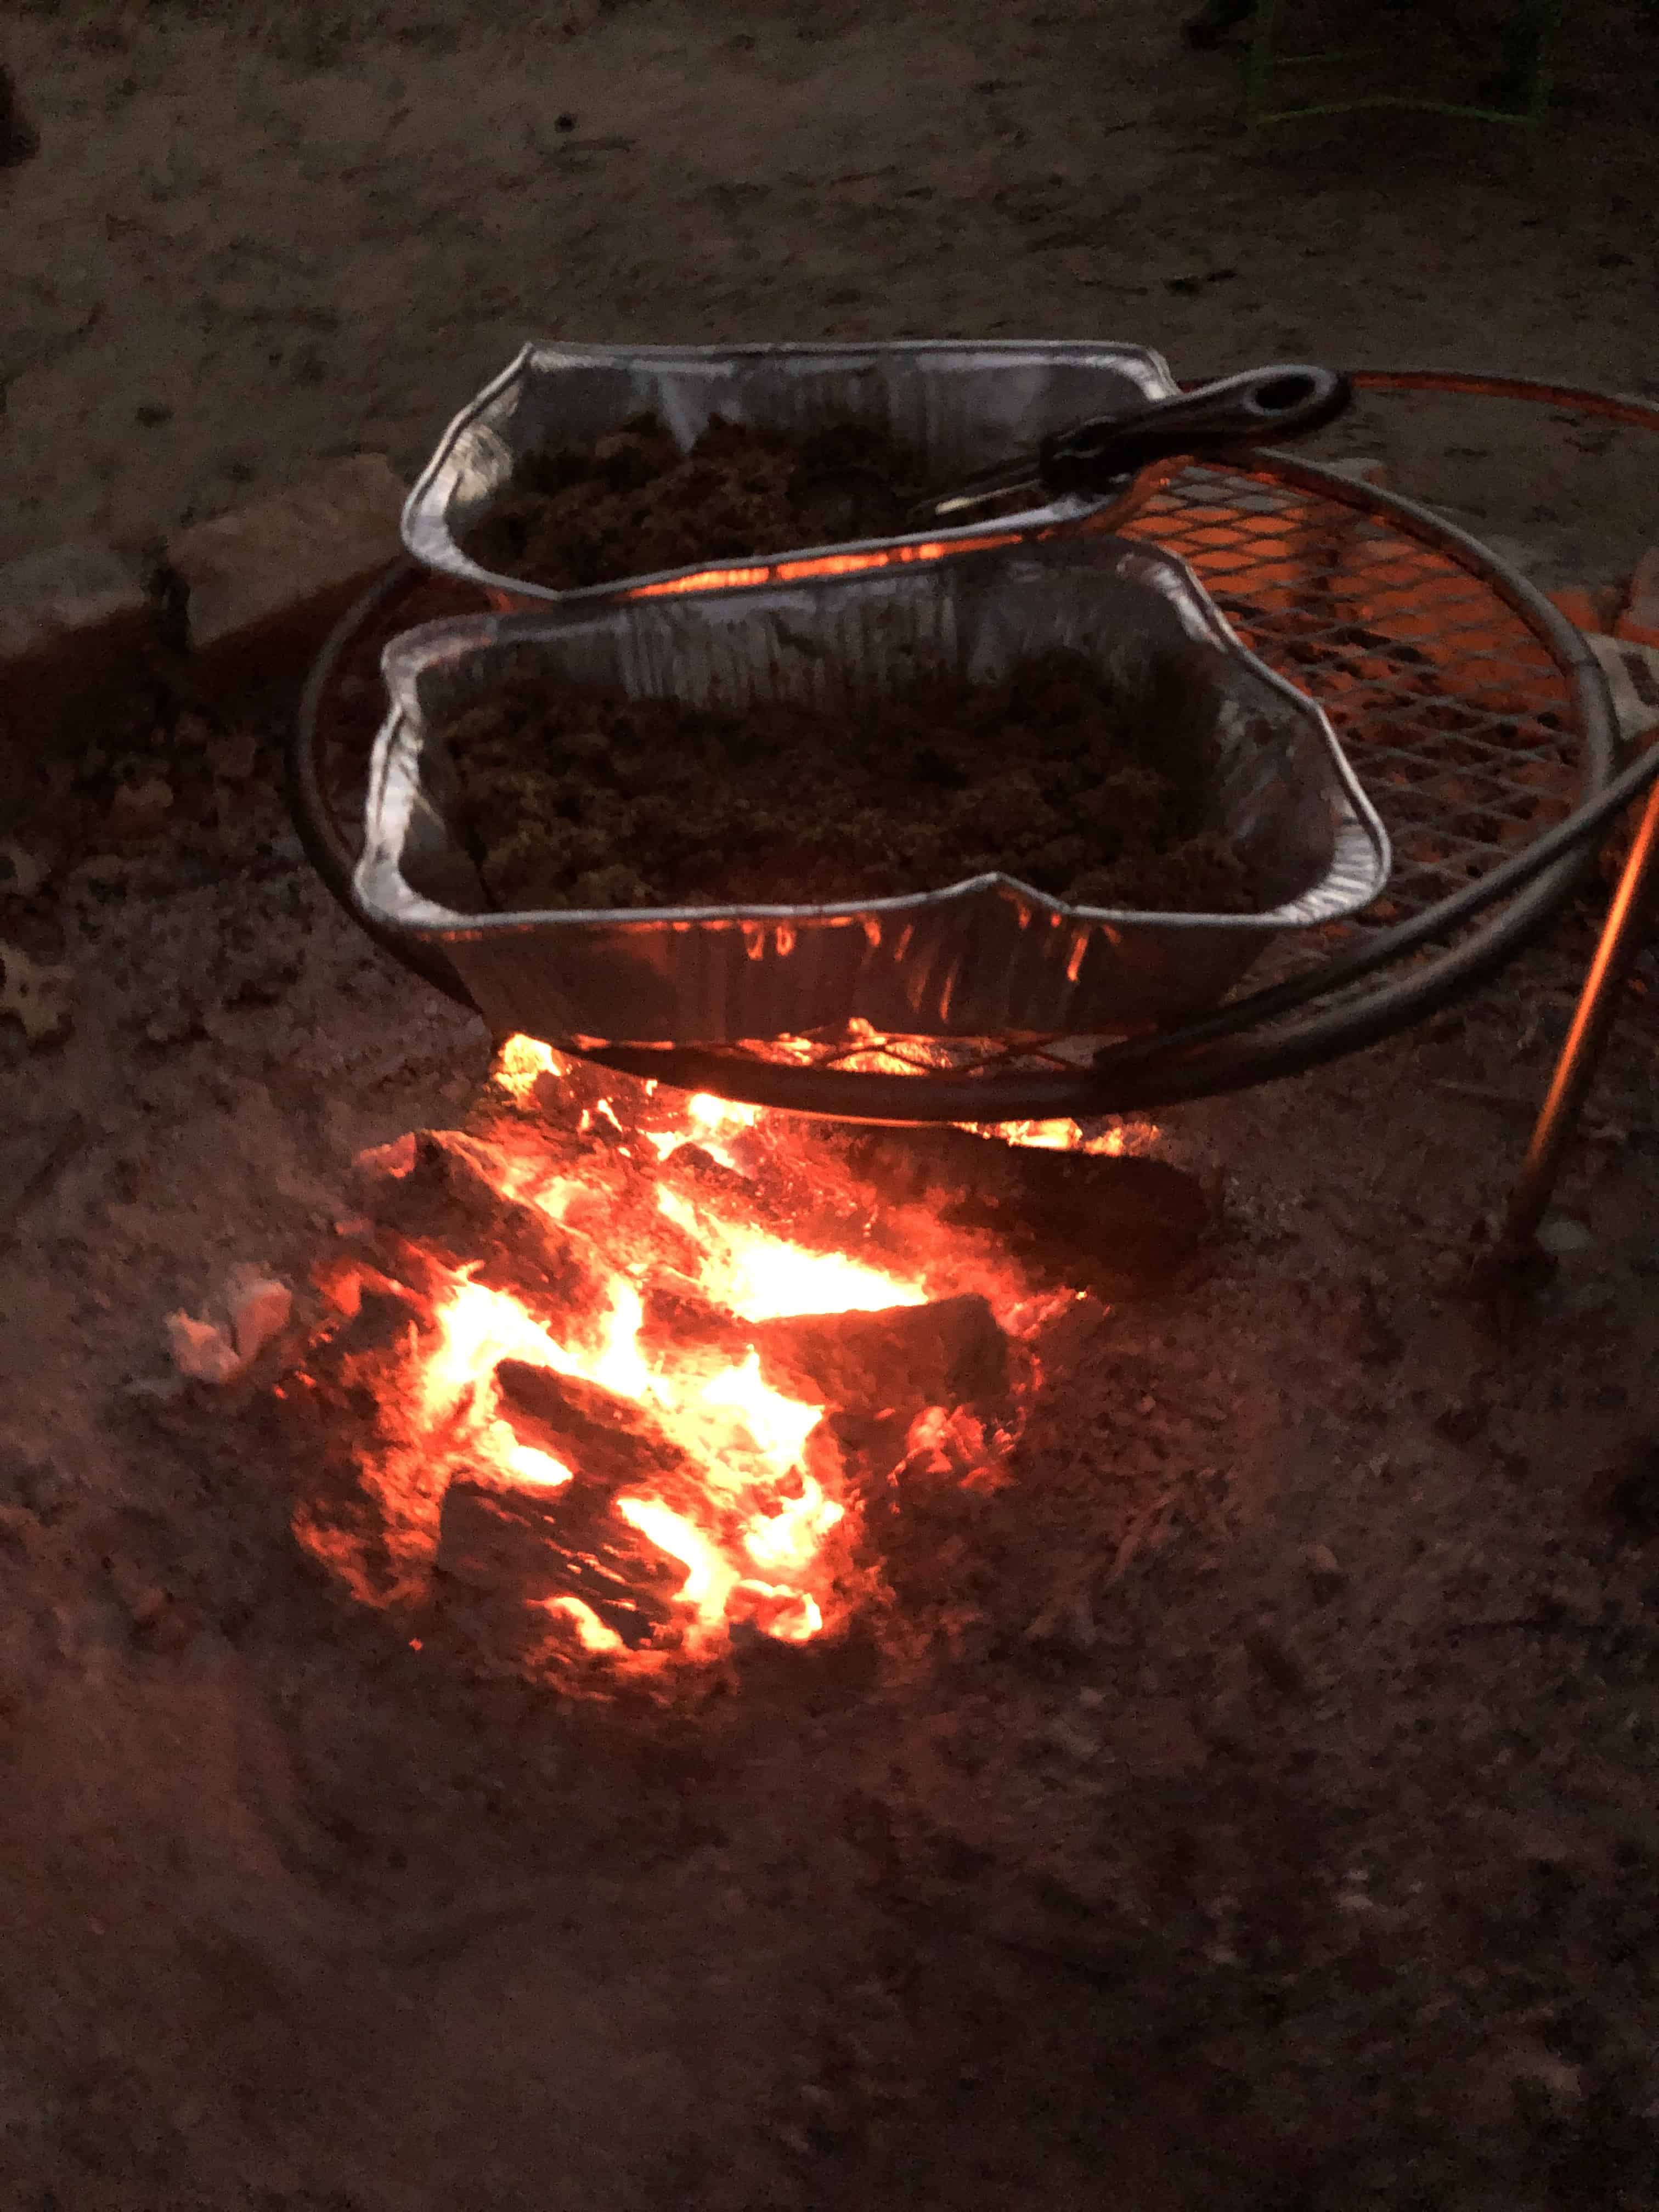 Photograph of warming taco meat over a campfire